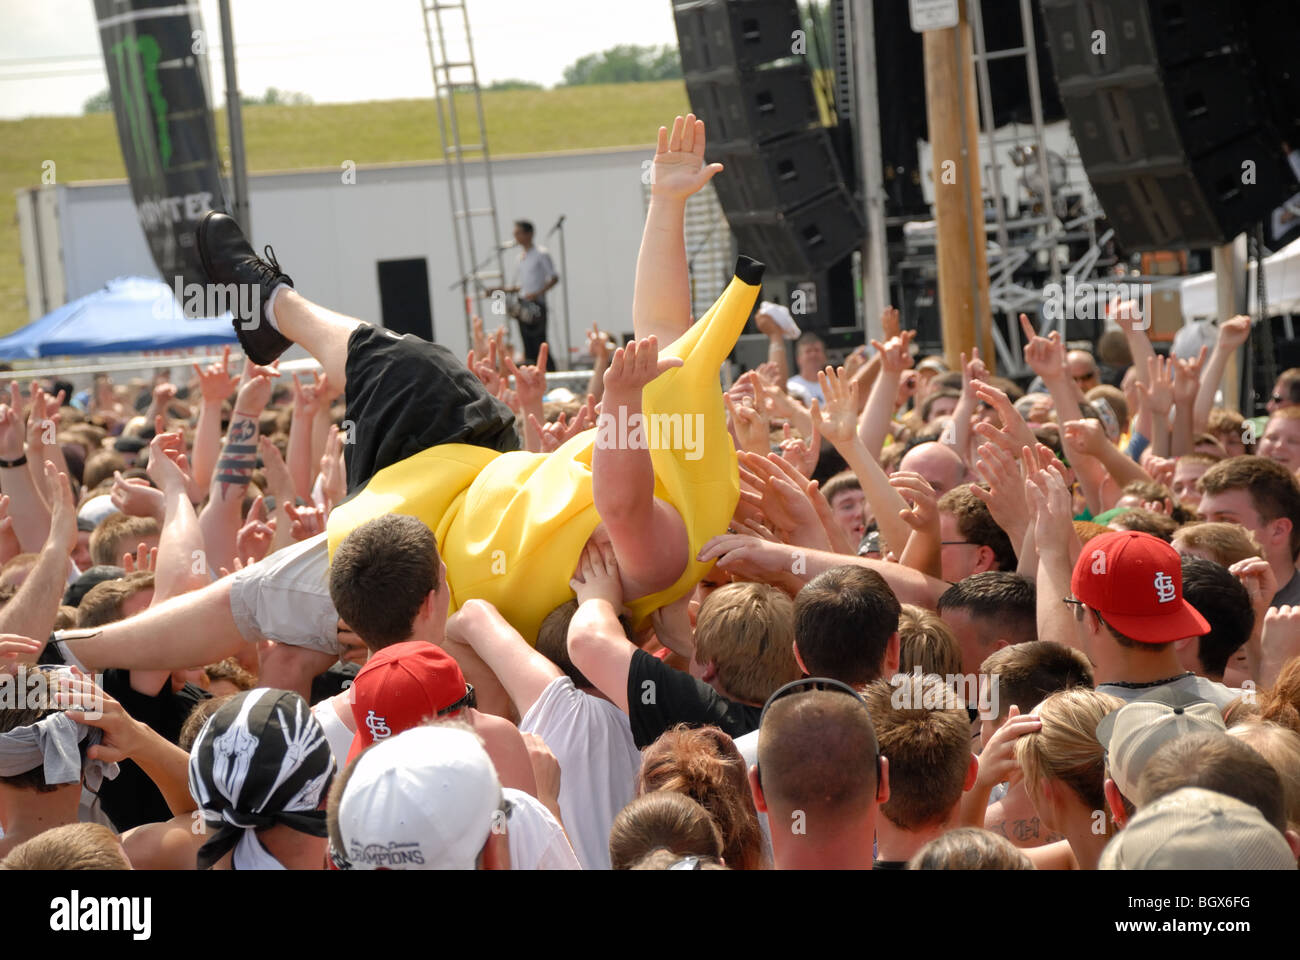 A teenager in a banana suit being crowd surfed at a rock concert. Stock Photo